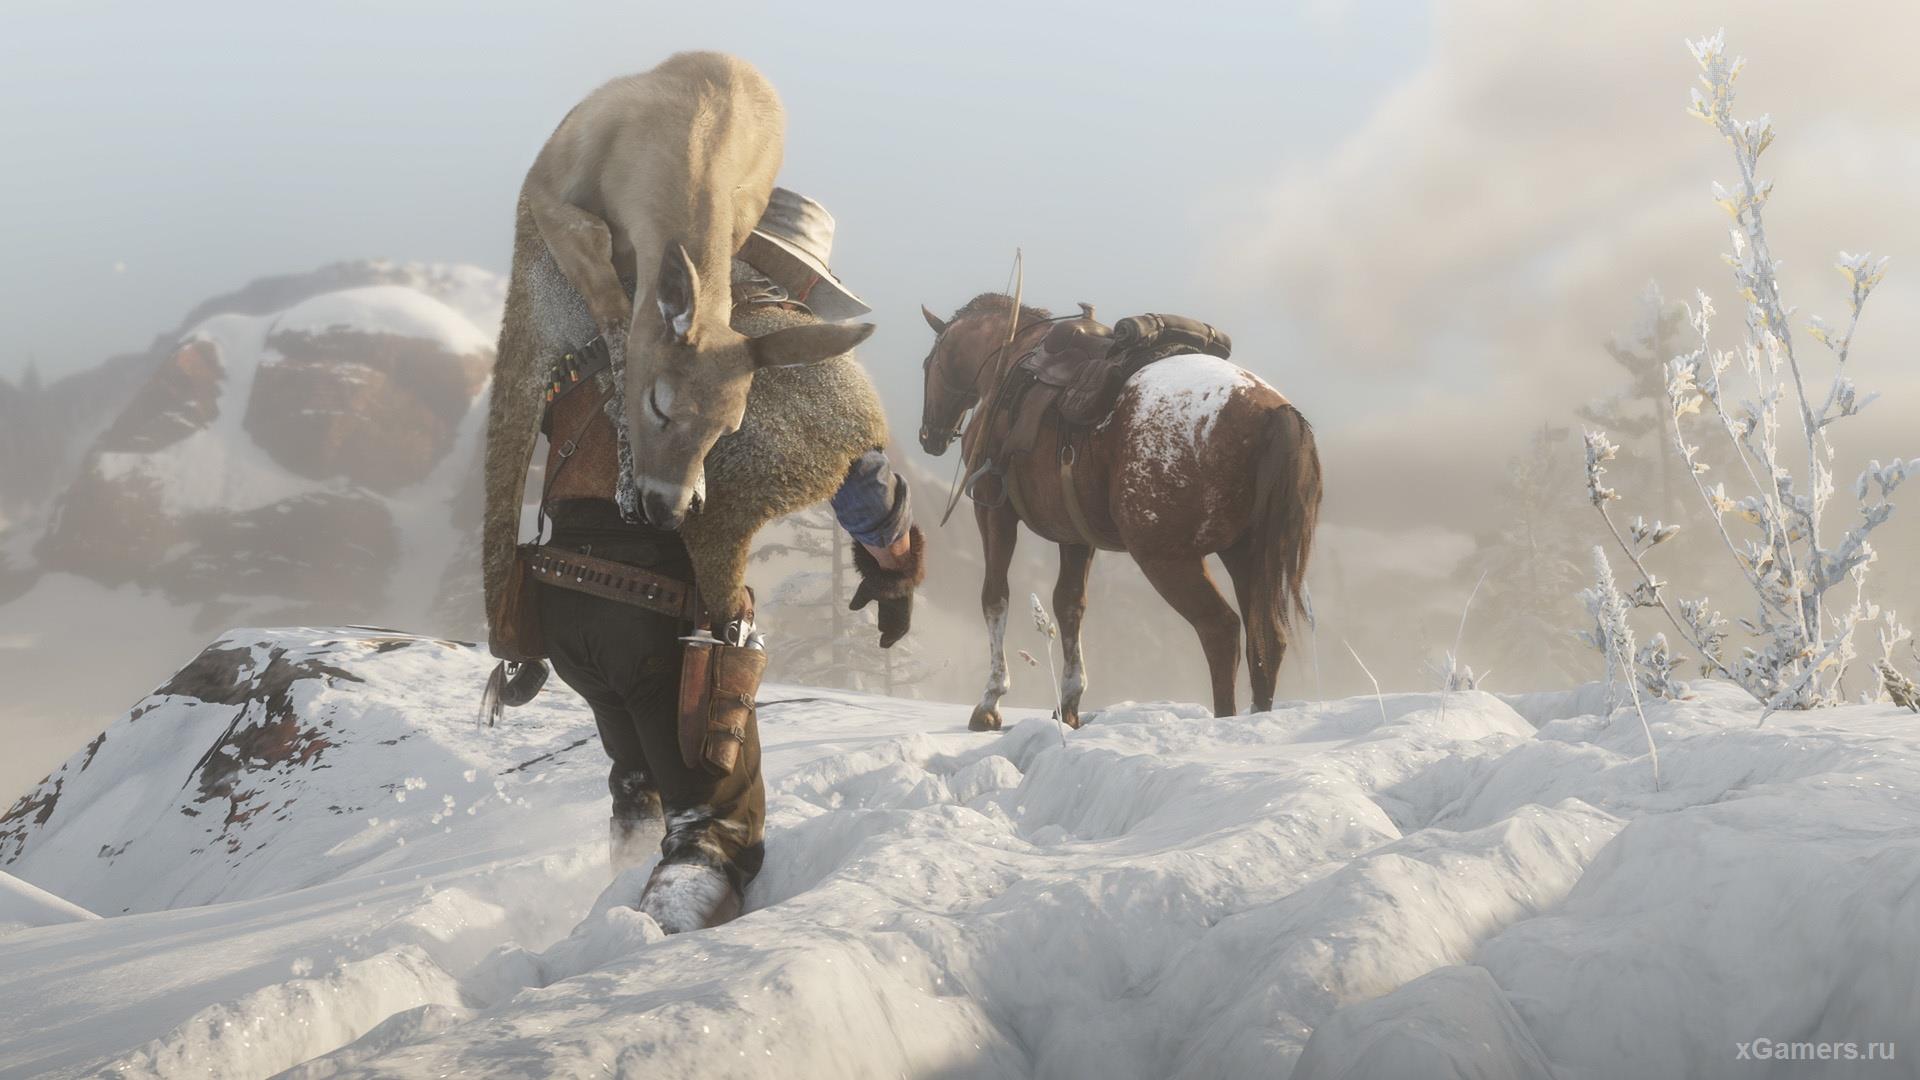 What bonuses give amulets in game RDR 2